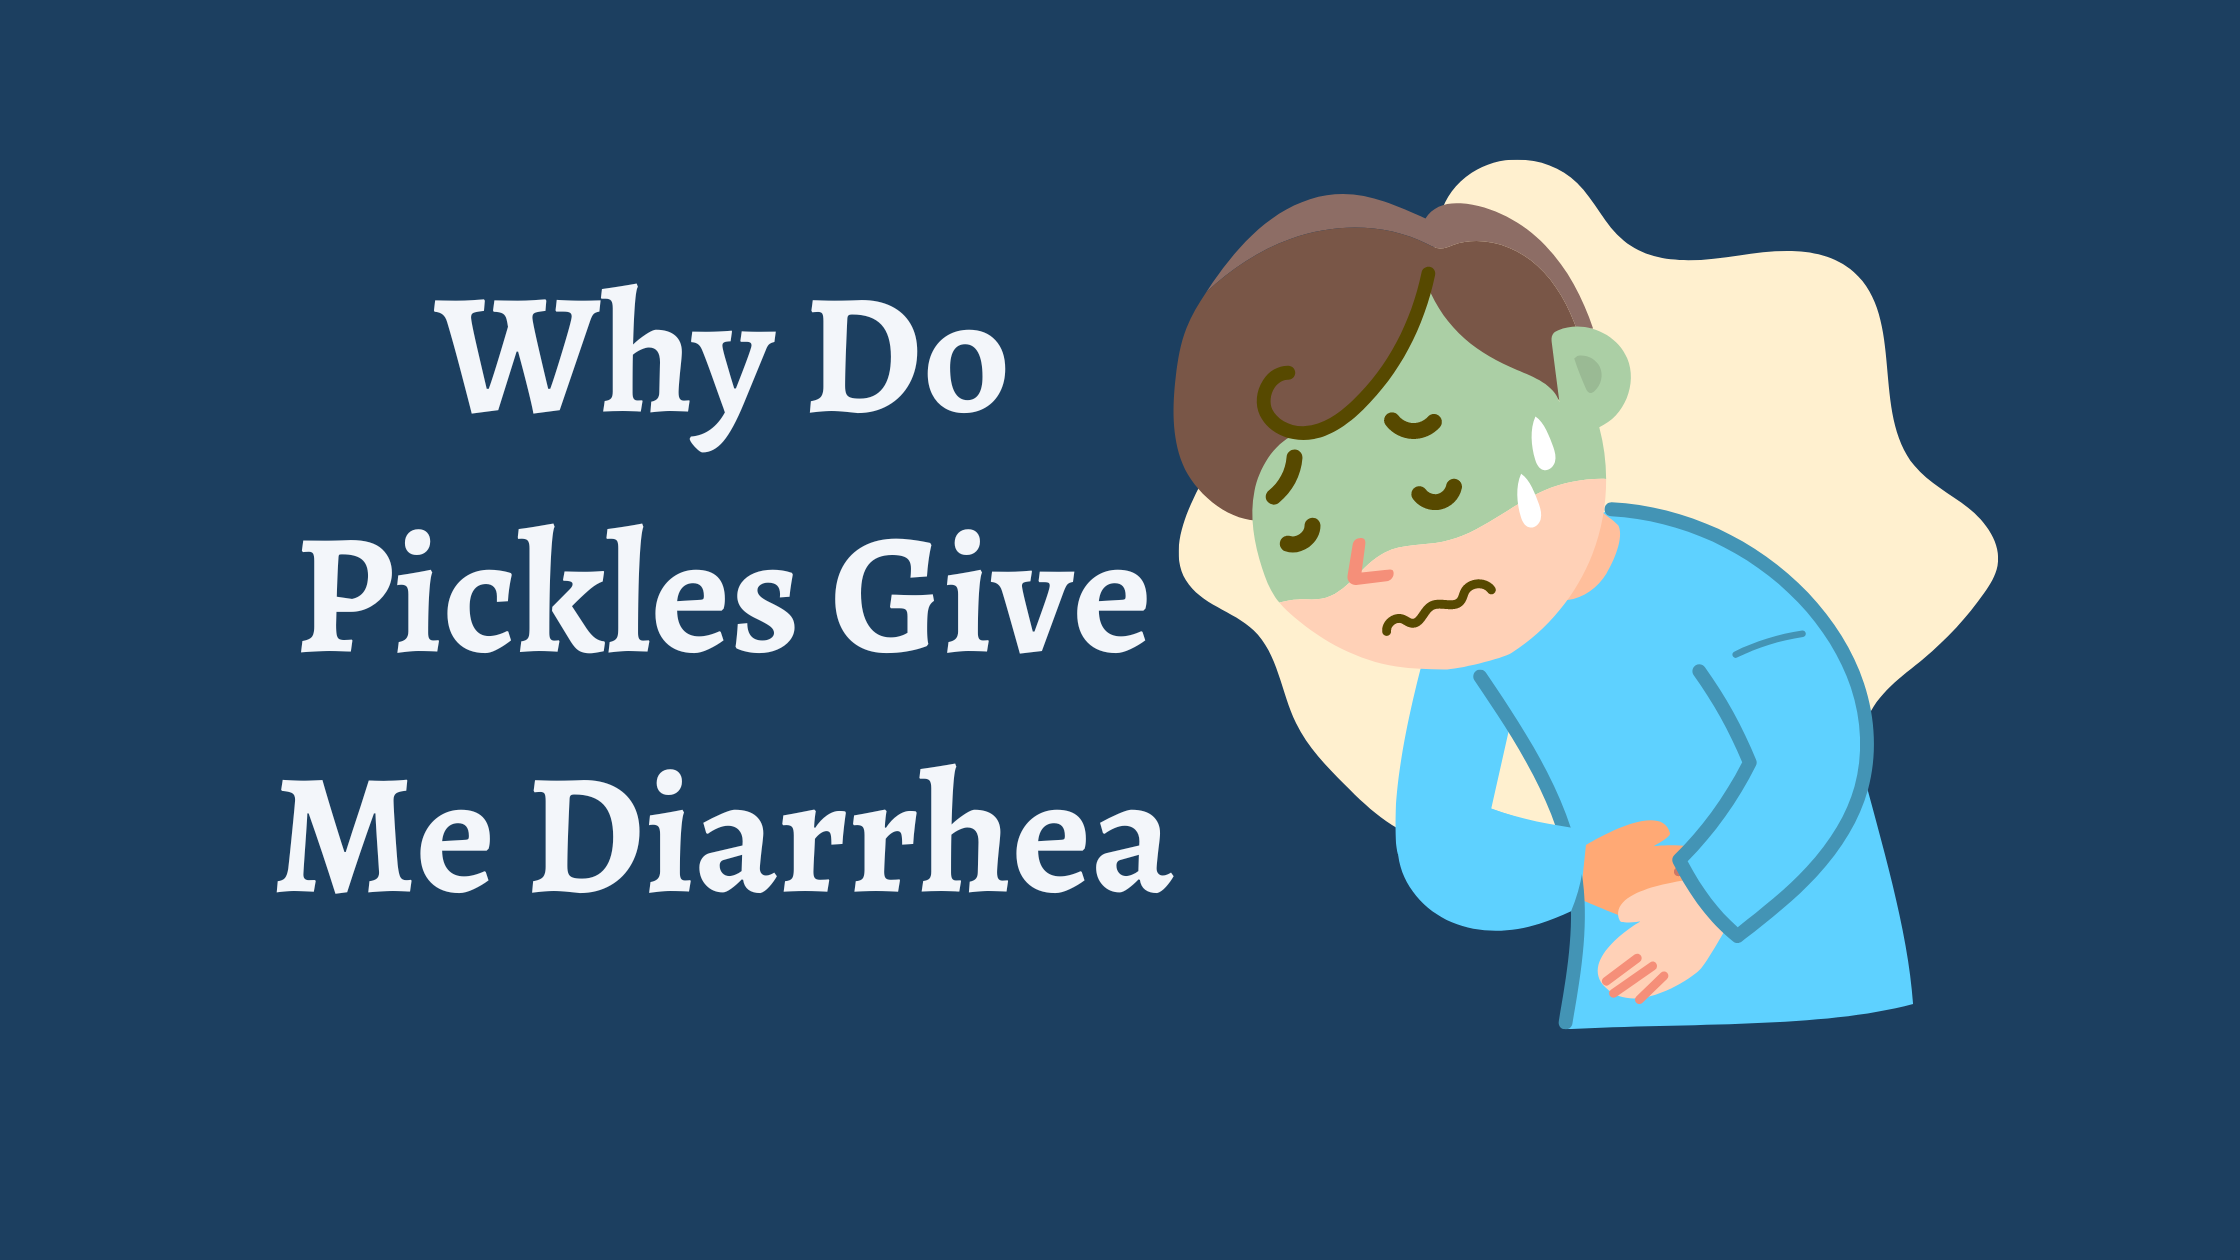 Why Do Pickles Give Me Diarrhea